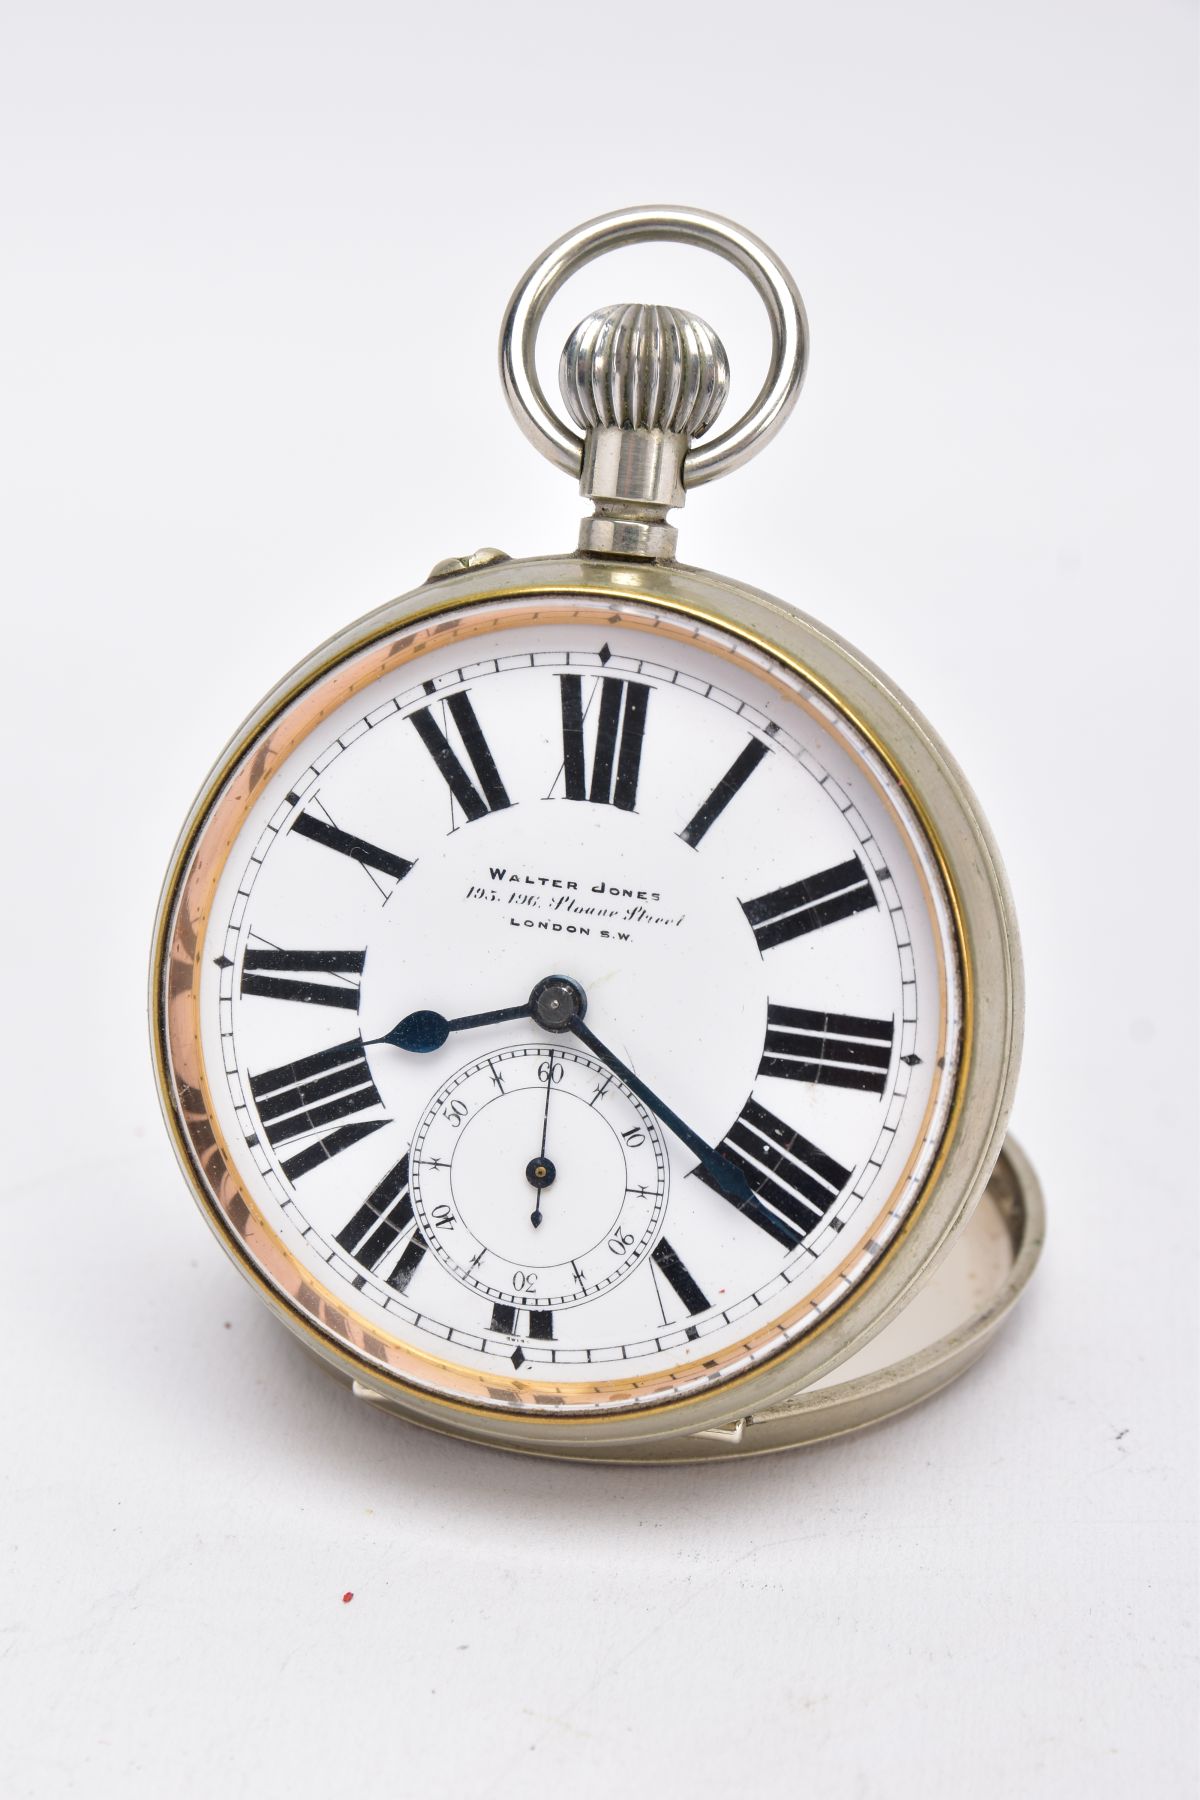 A STEEL GOLIATH POCKET WATCH, dial signed Walter Jones, seconds sweep subsidiary dial at 6 o'clock - Image 5 of 7